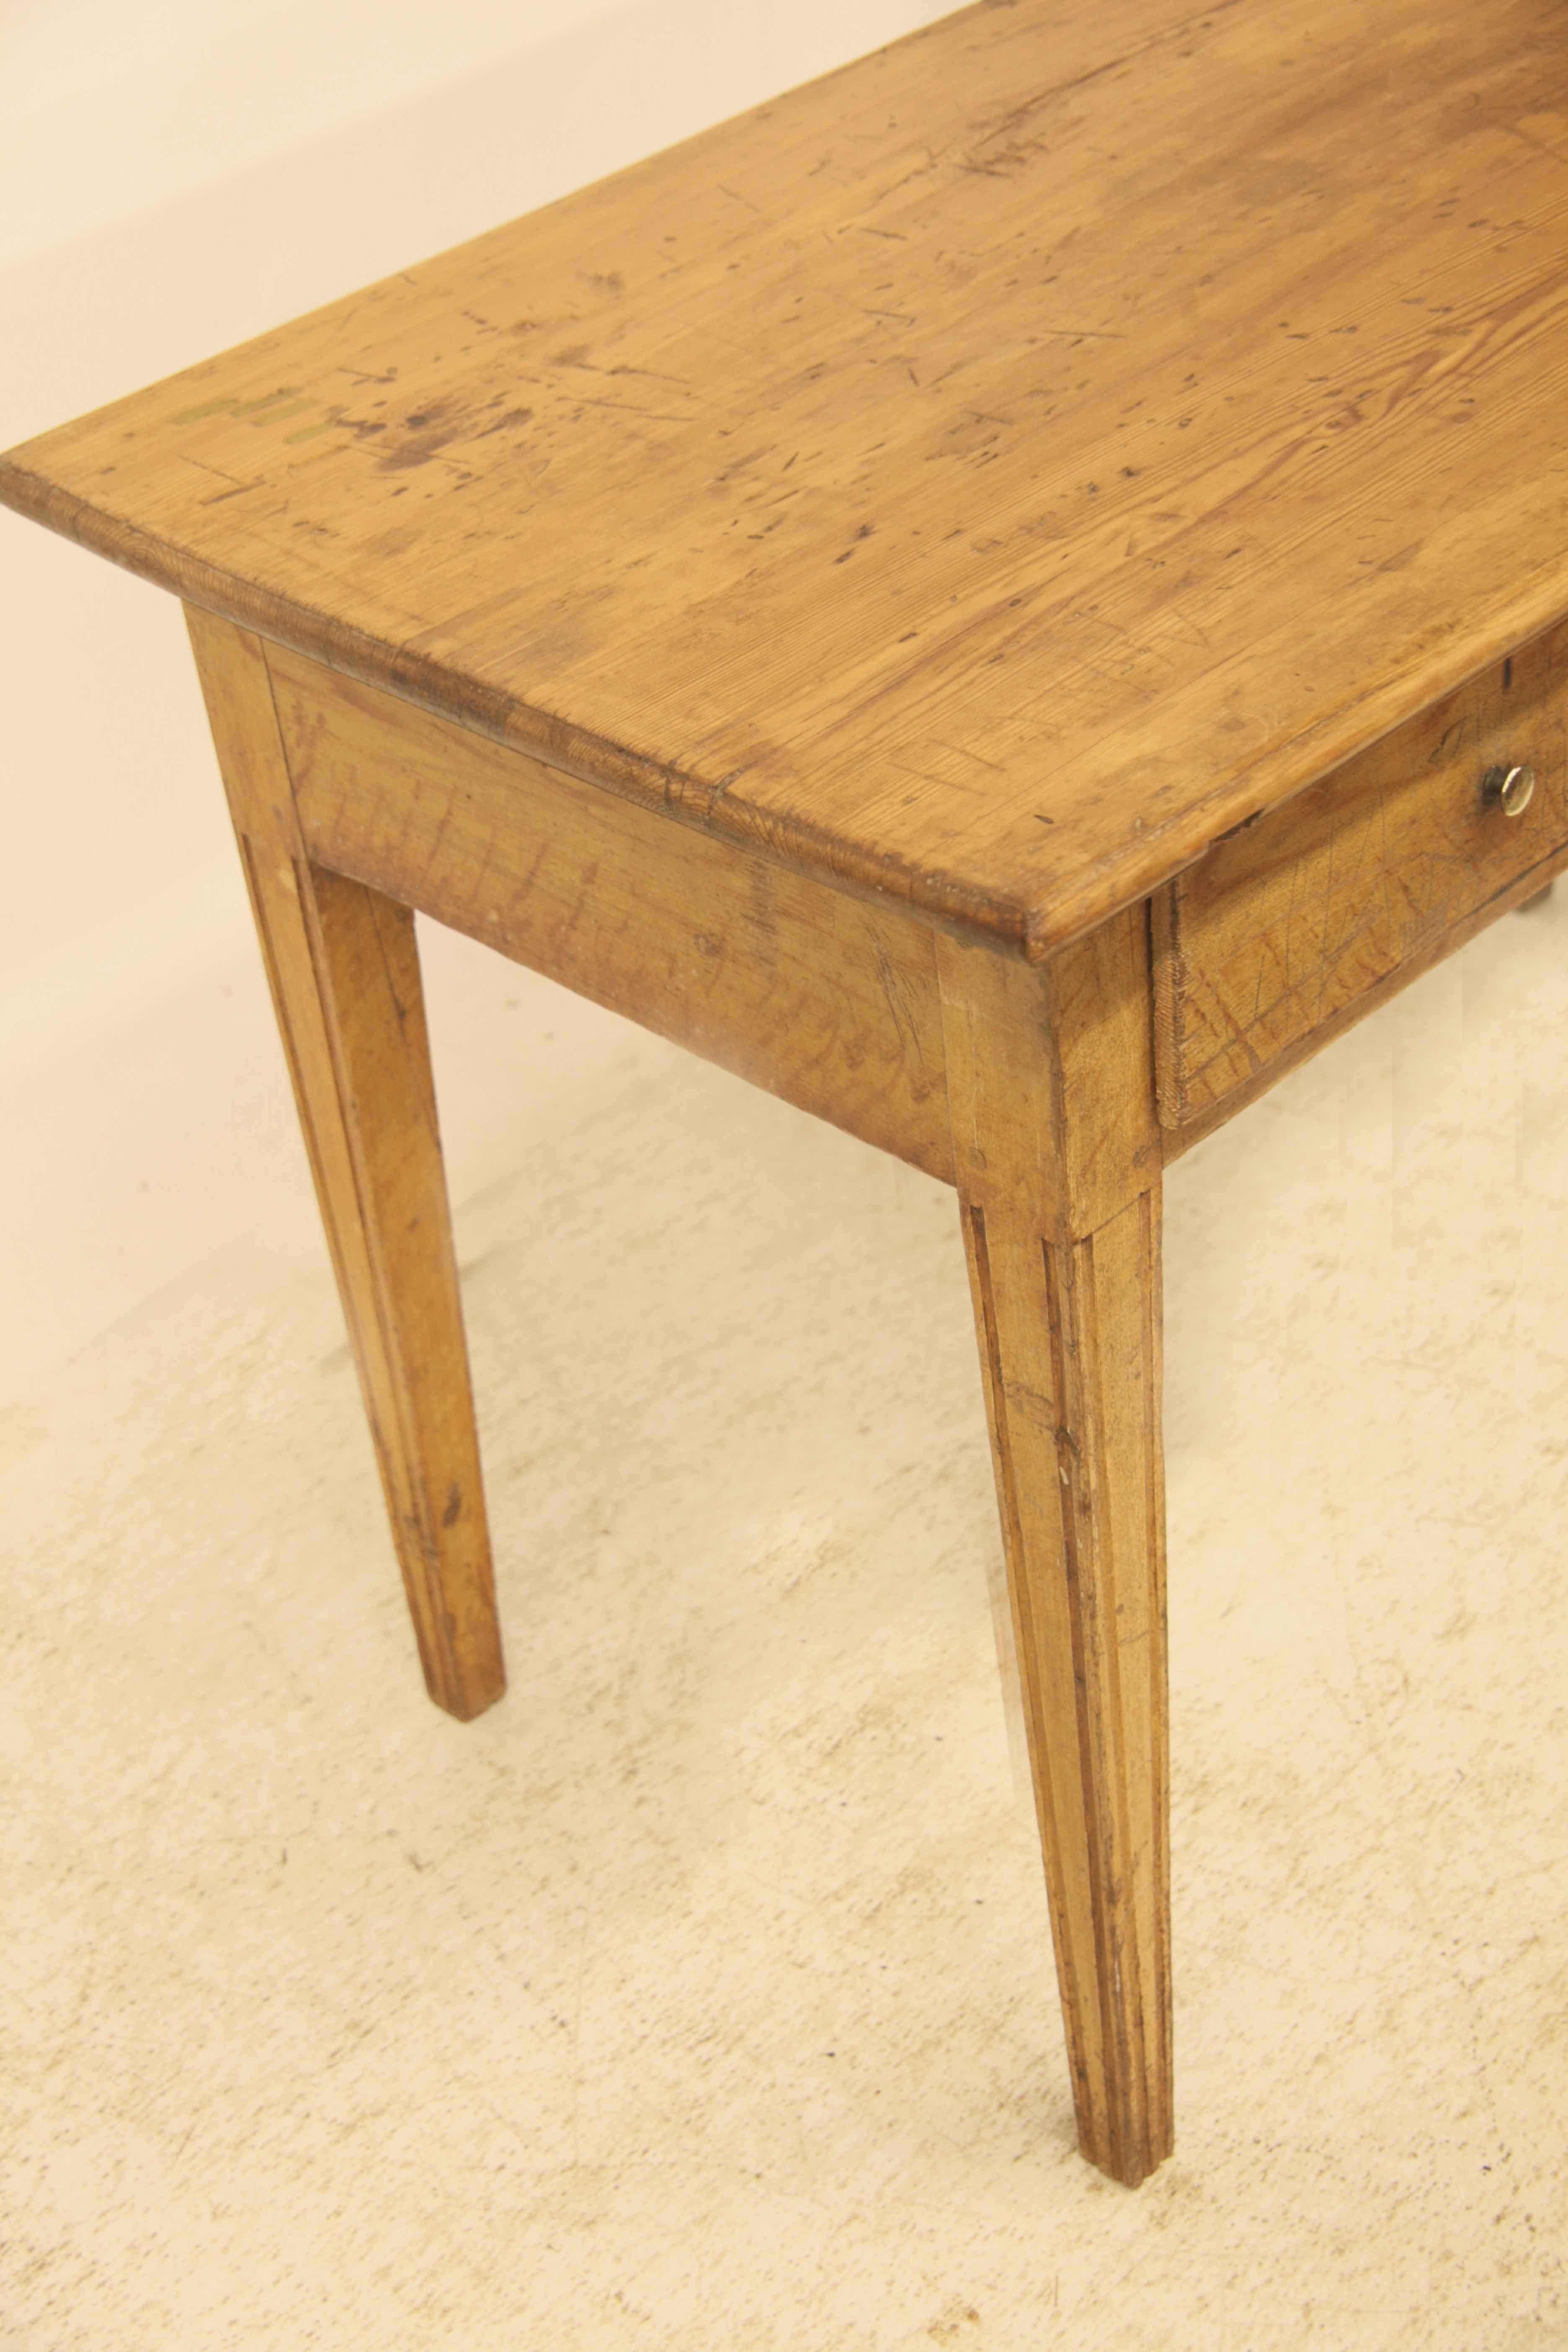 Scandinavian grain painted table , the scrub top ( no paint ) has much 'character' with some stains and scuffs but has nice patina and color.  The rest of the table is grain painted to simulate pine ( even the back is well done ) , the single drawer